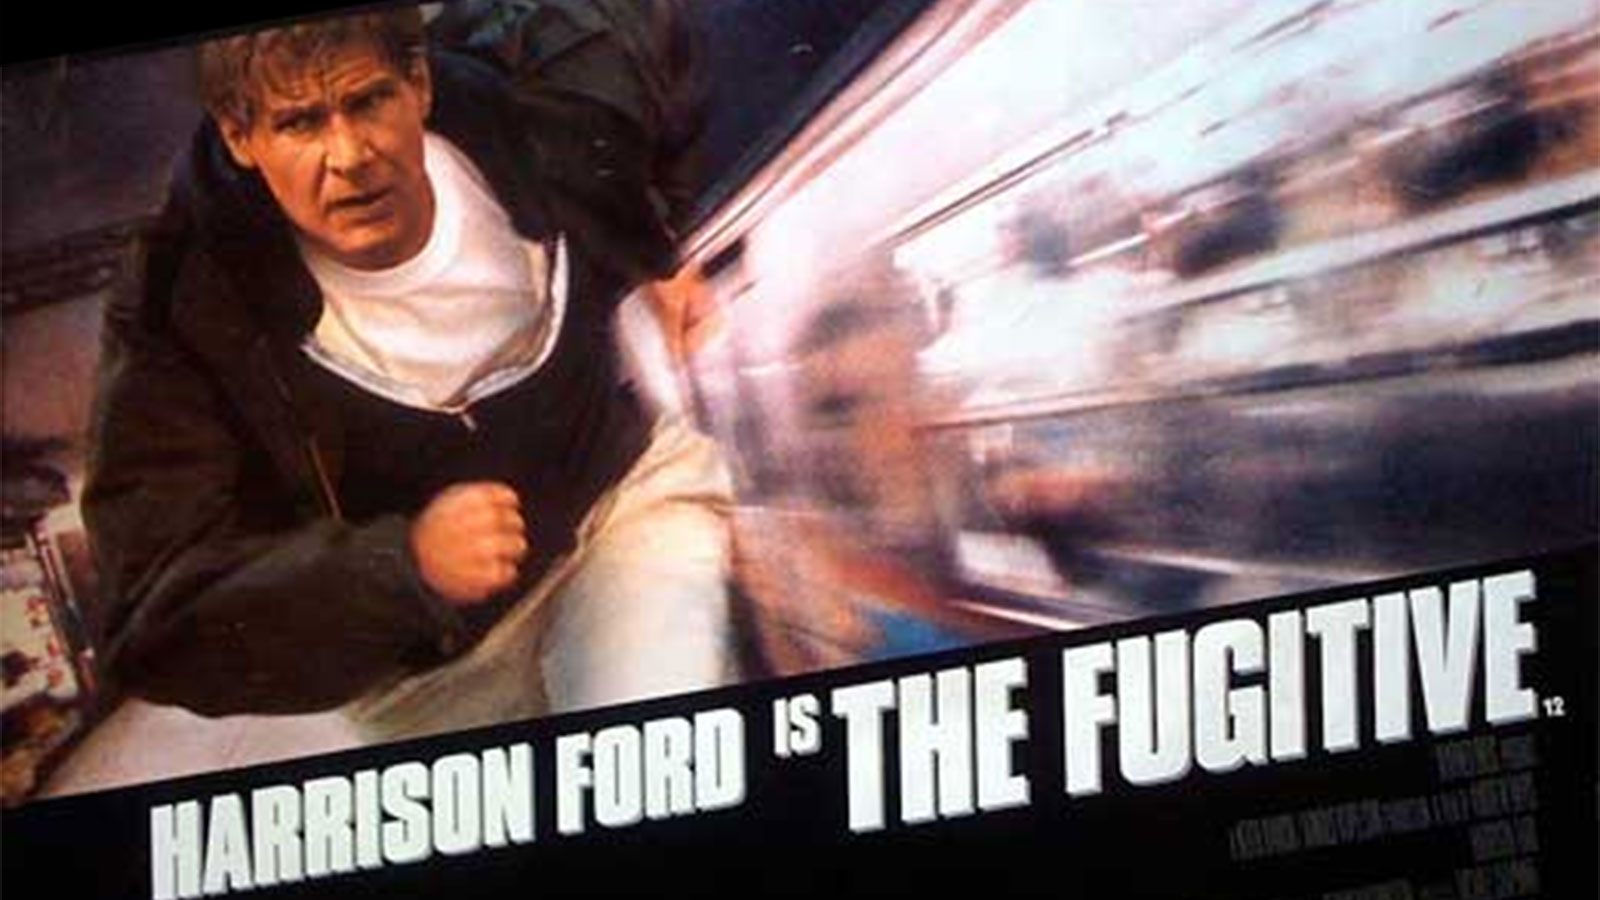 Harrison Ford is The Fugitive